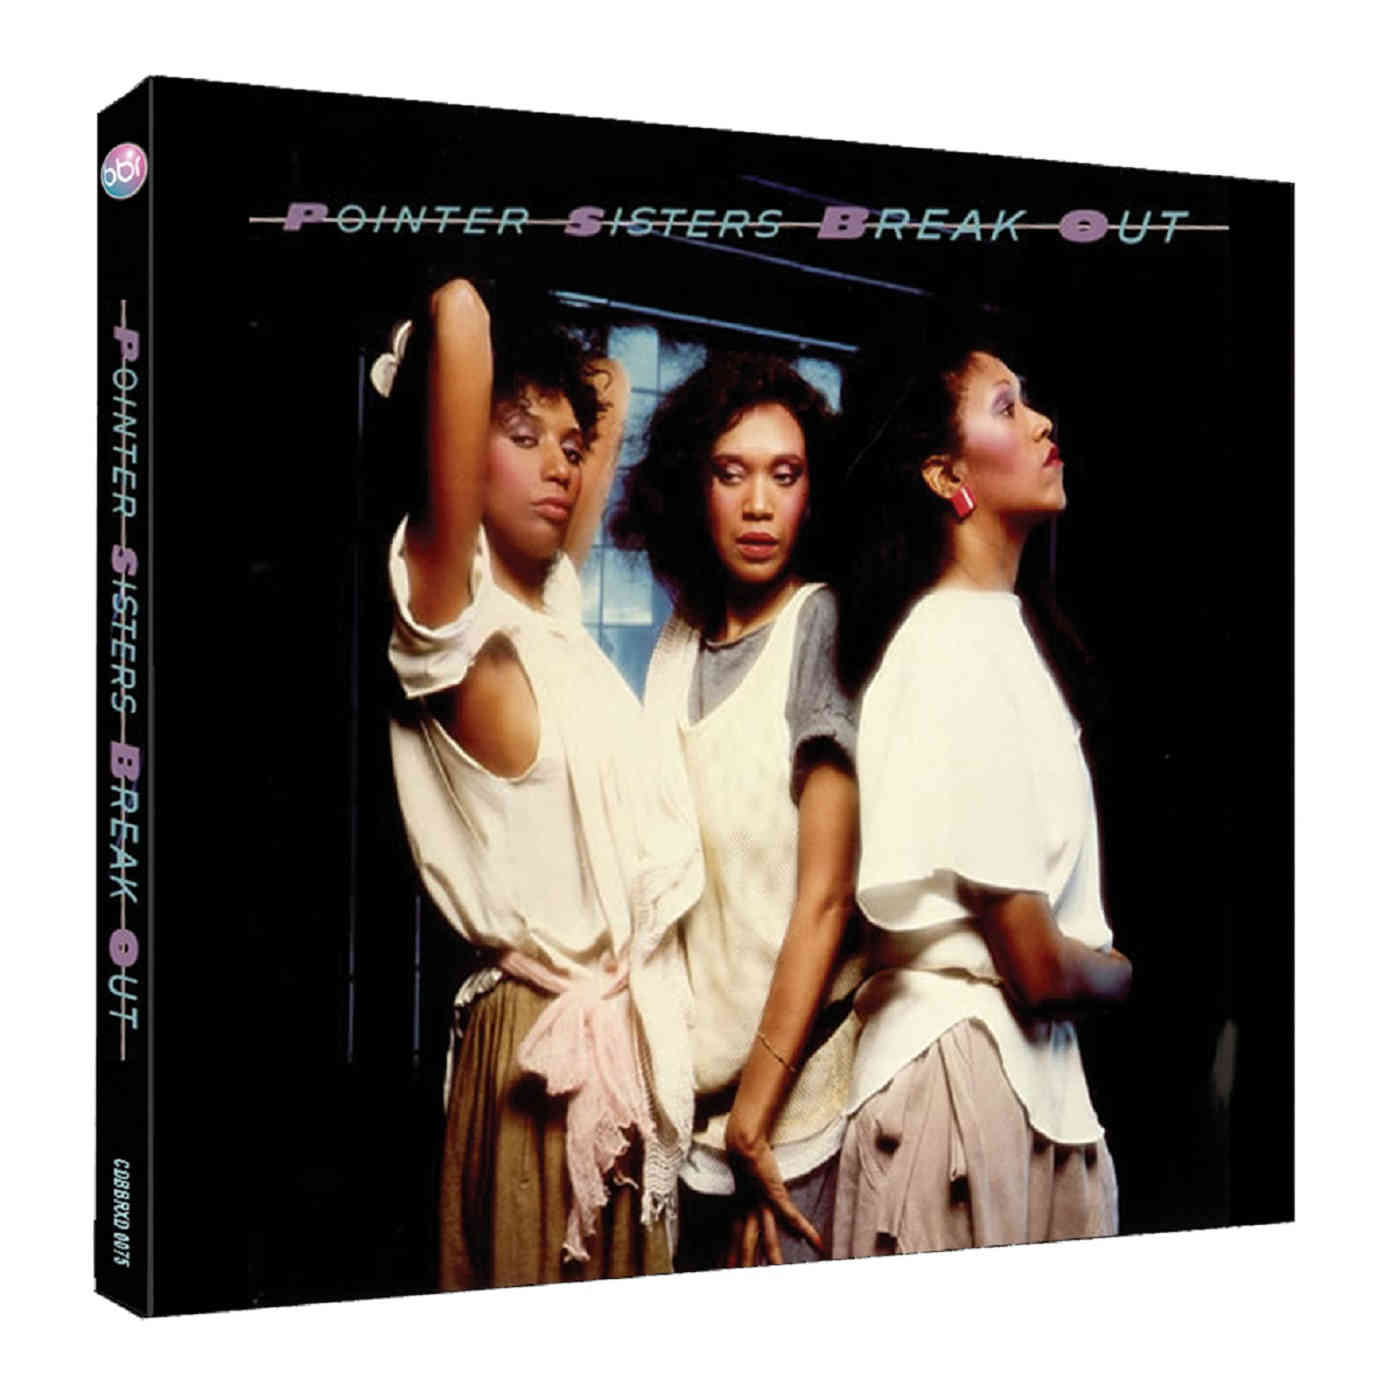 Pointer Sisters: Break Out, Deluxe CD Edition